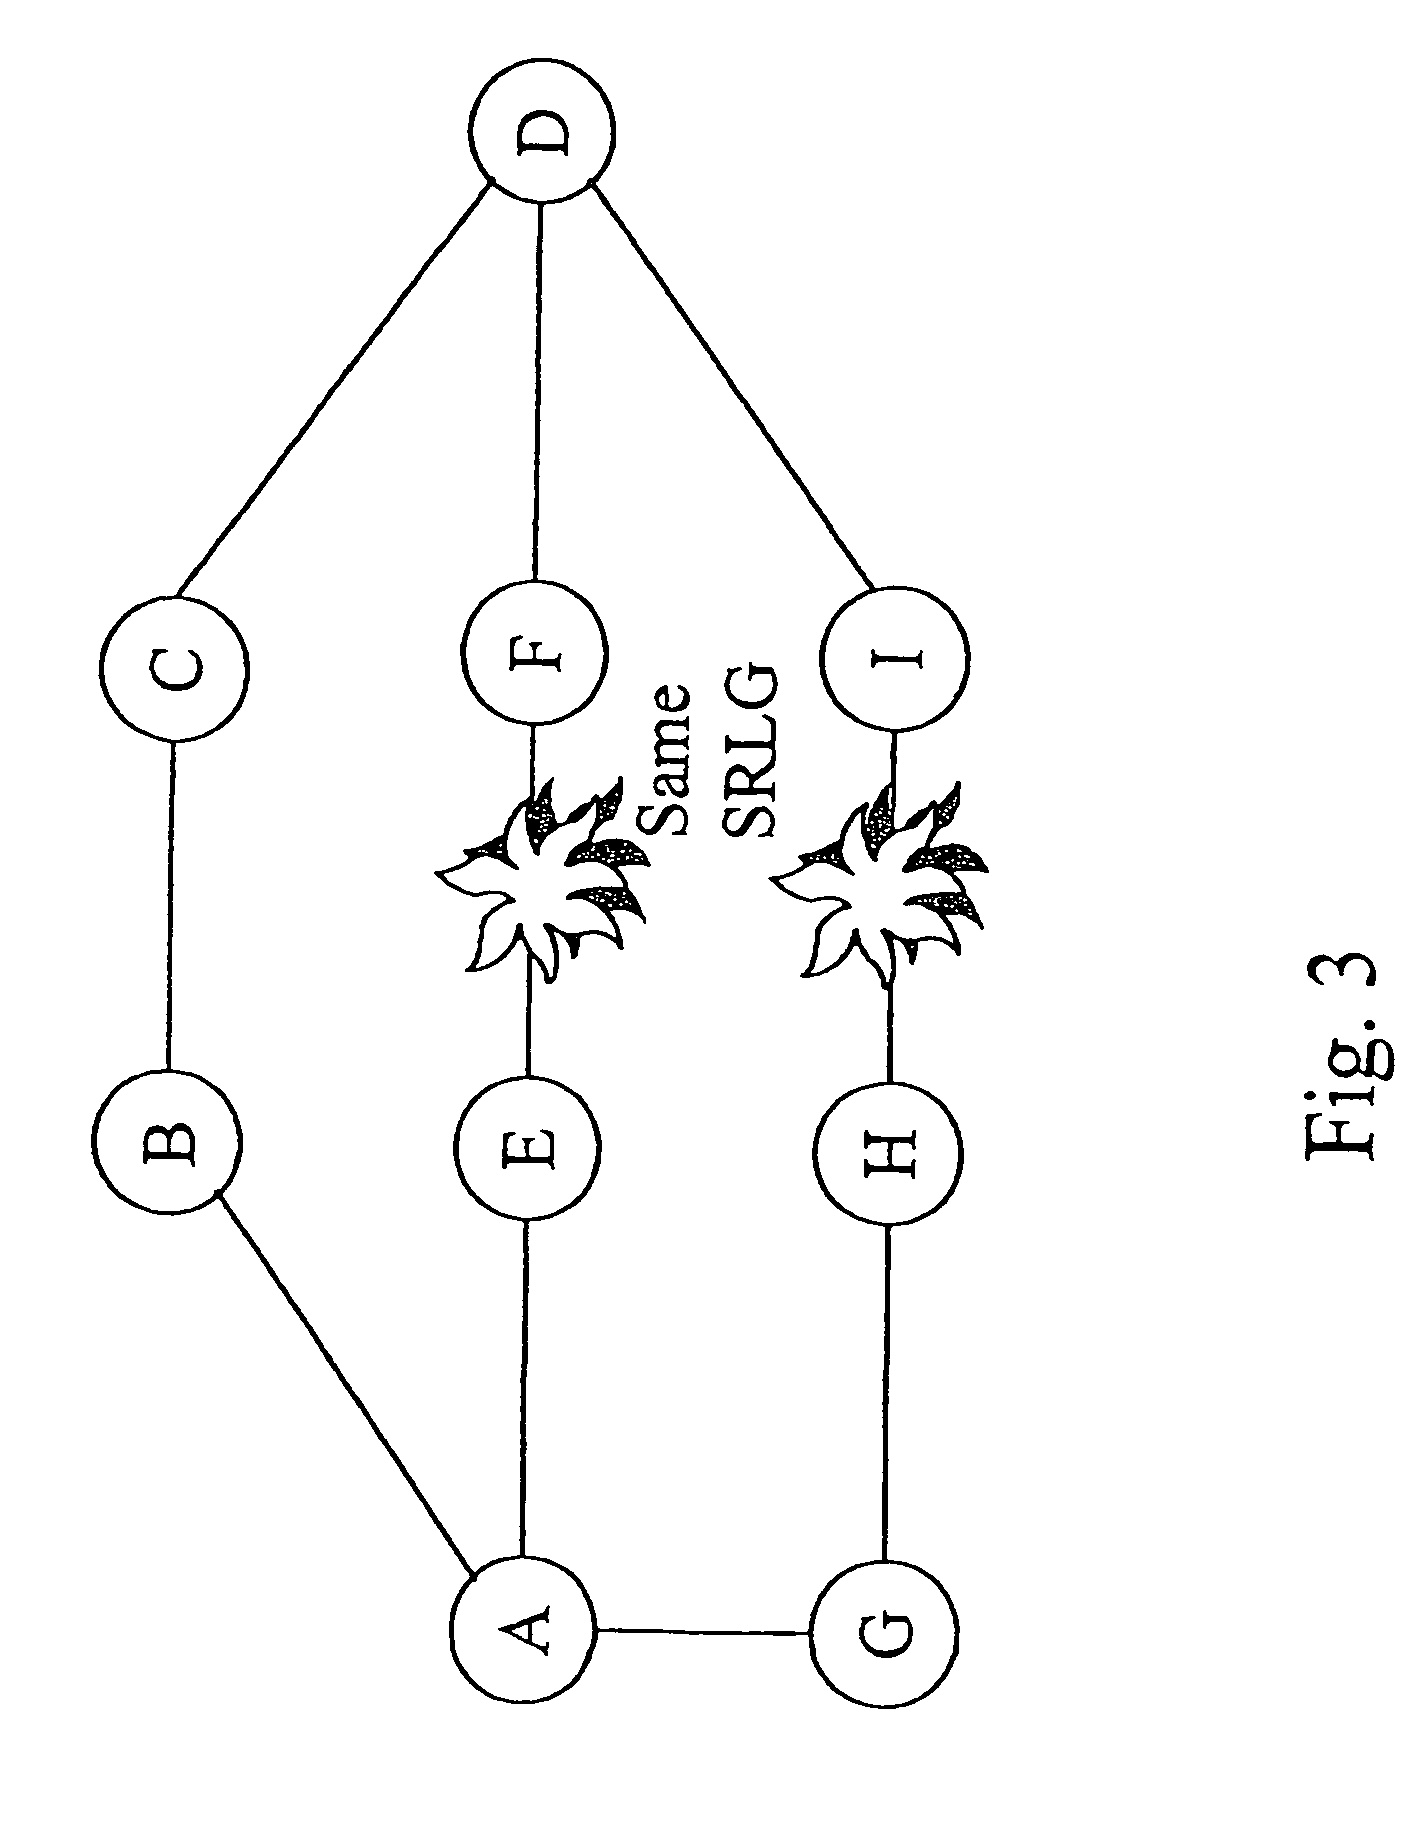 Control of optical connections in an optical network